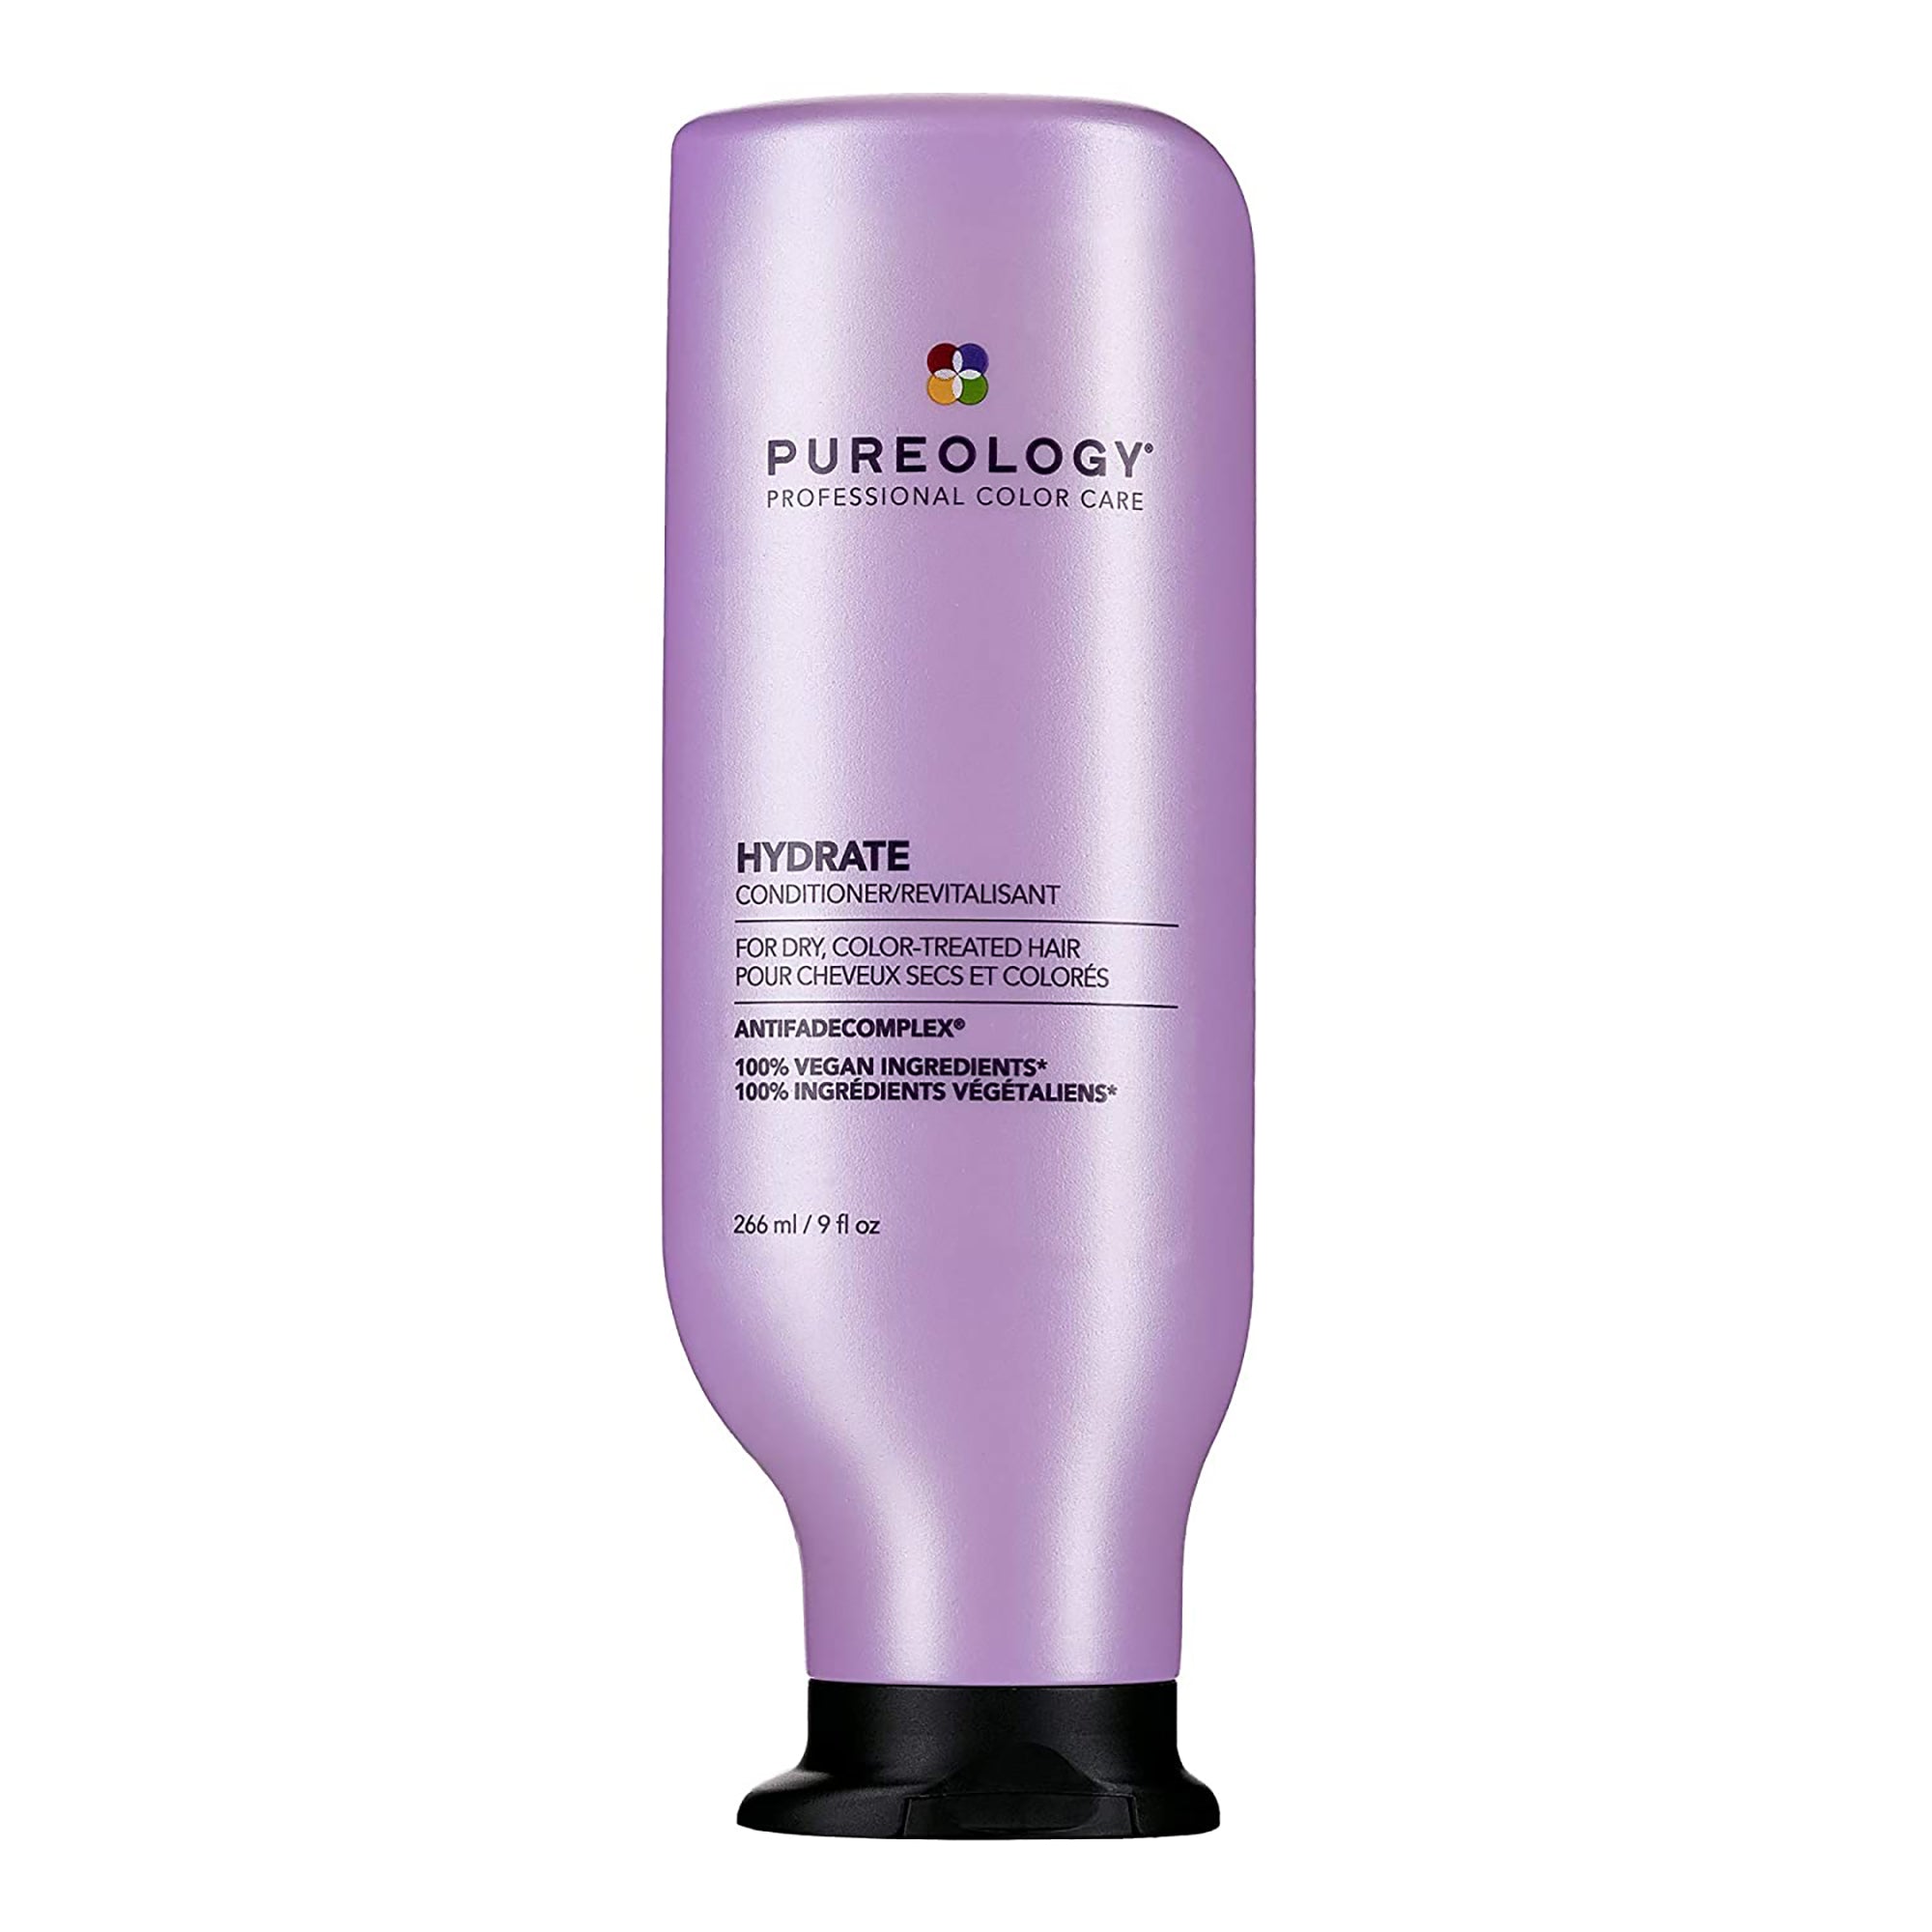 Transform Your Hair with Pureology Hydrate - Planet Beauty